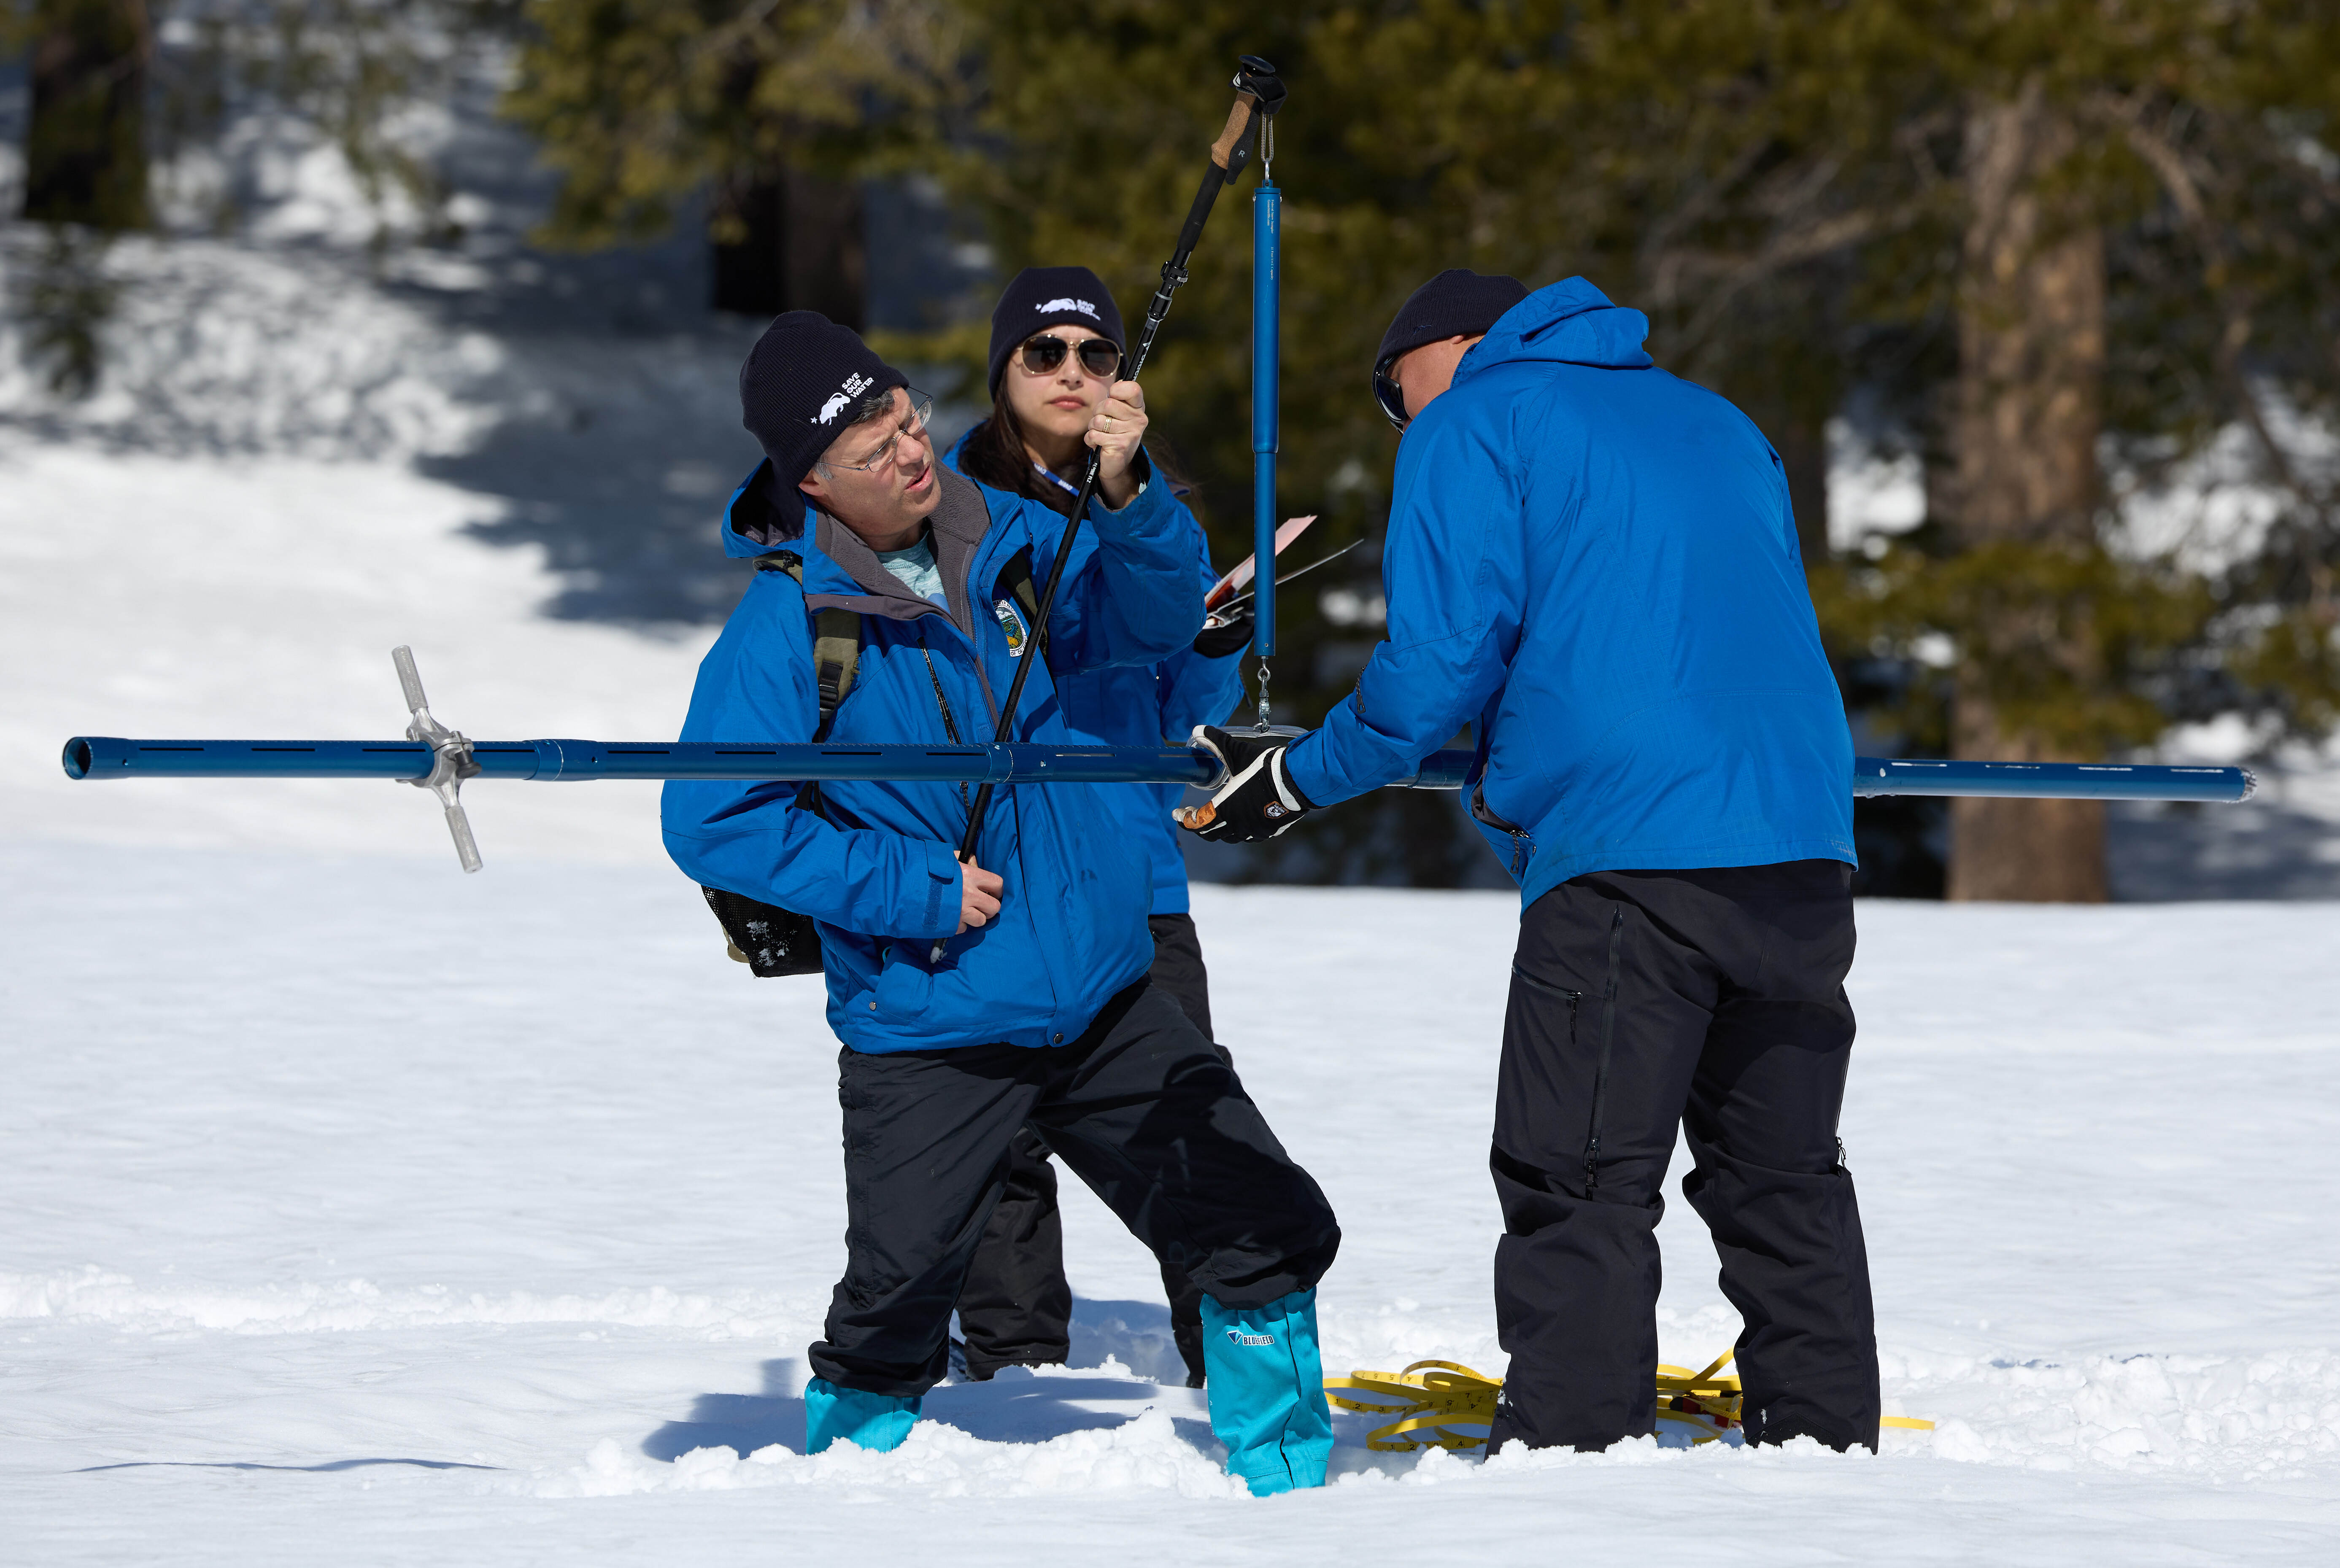 Andrew Reising left, a California Department of Water Resources Engineer in the Snow Surveys and Water Supply Forecasting Unit, Sean de Guzman, right, Manager of the California Department of Water Resources Snow Surveys and Water Supply Forecasting Unit, and Angelique Fabbiani-Leon California Department of Water Resources State Hydrometeorologist in Hydrology Section take measurements during a phase of the third media snow survey of the 2023 season at Phillips Station in the Sierra Nevada Mountains. The survey is held approximately 90 miles east of Sacramento off Highway 50 in El Dorado County. Photo taken March 3, 2023.
 
Fred Greaves / California Department of Water Resources.